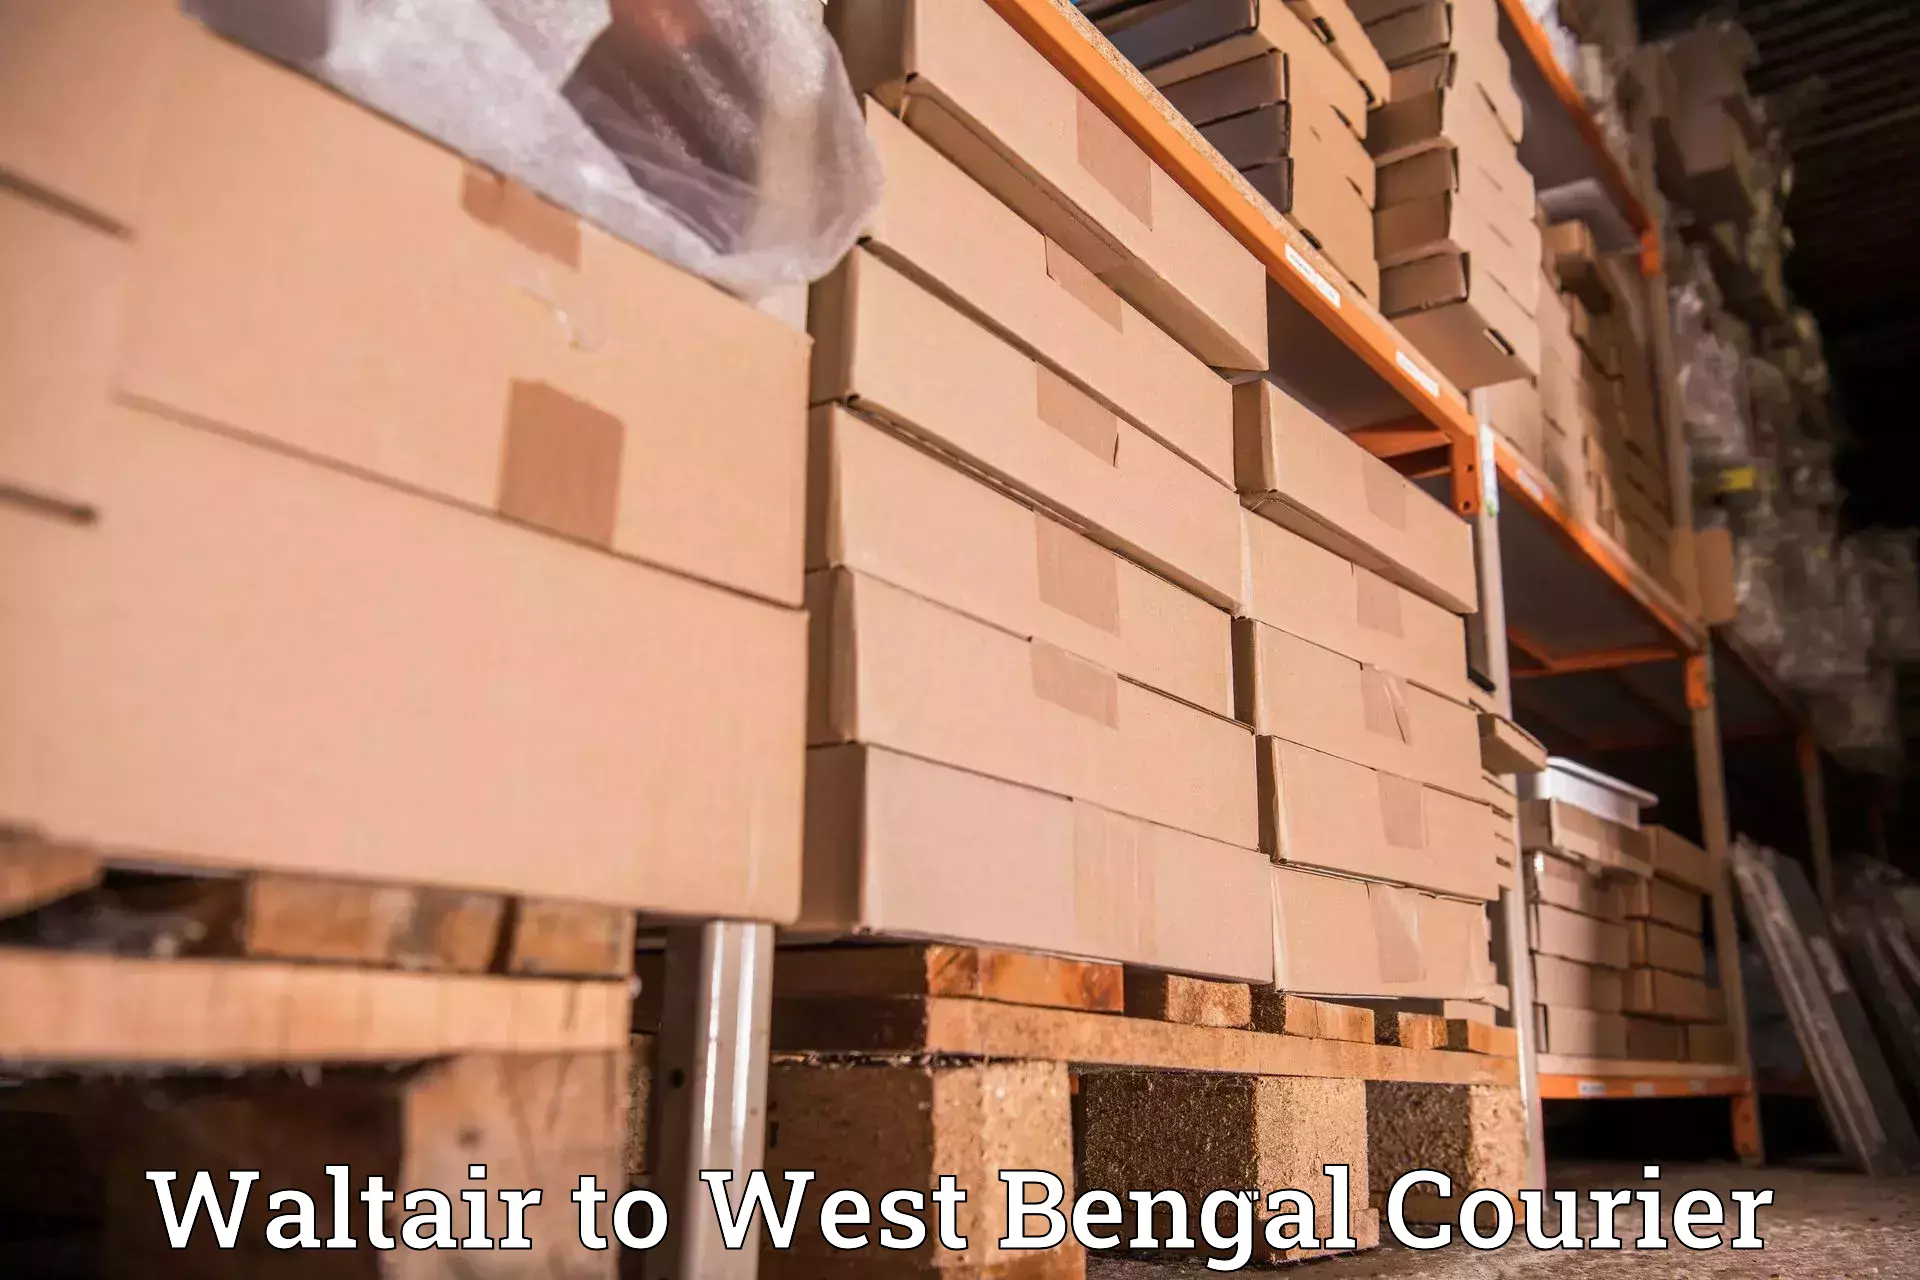 Reliable delivery network Waltair to West Bengal